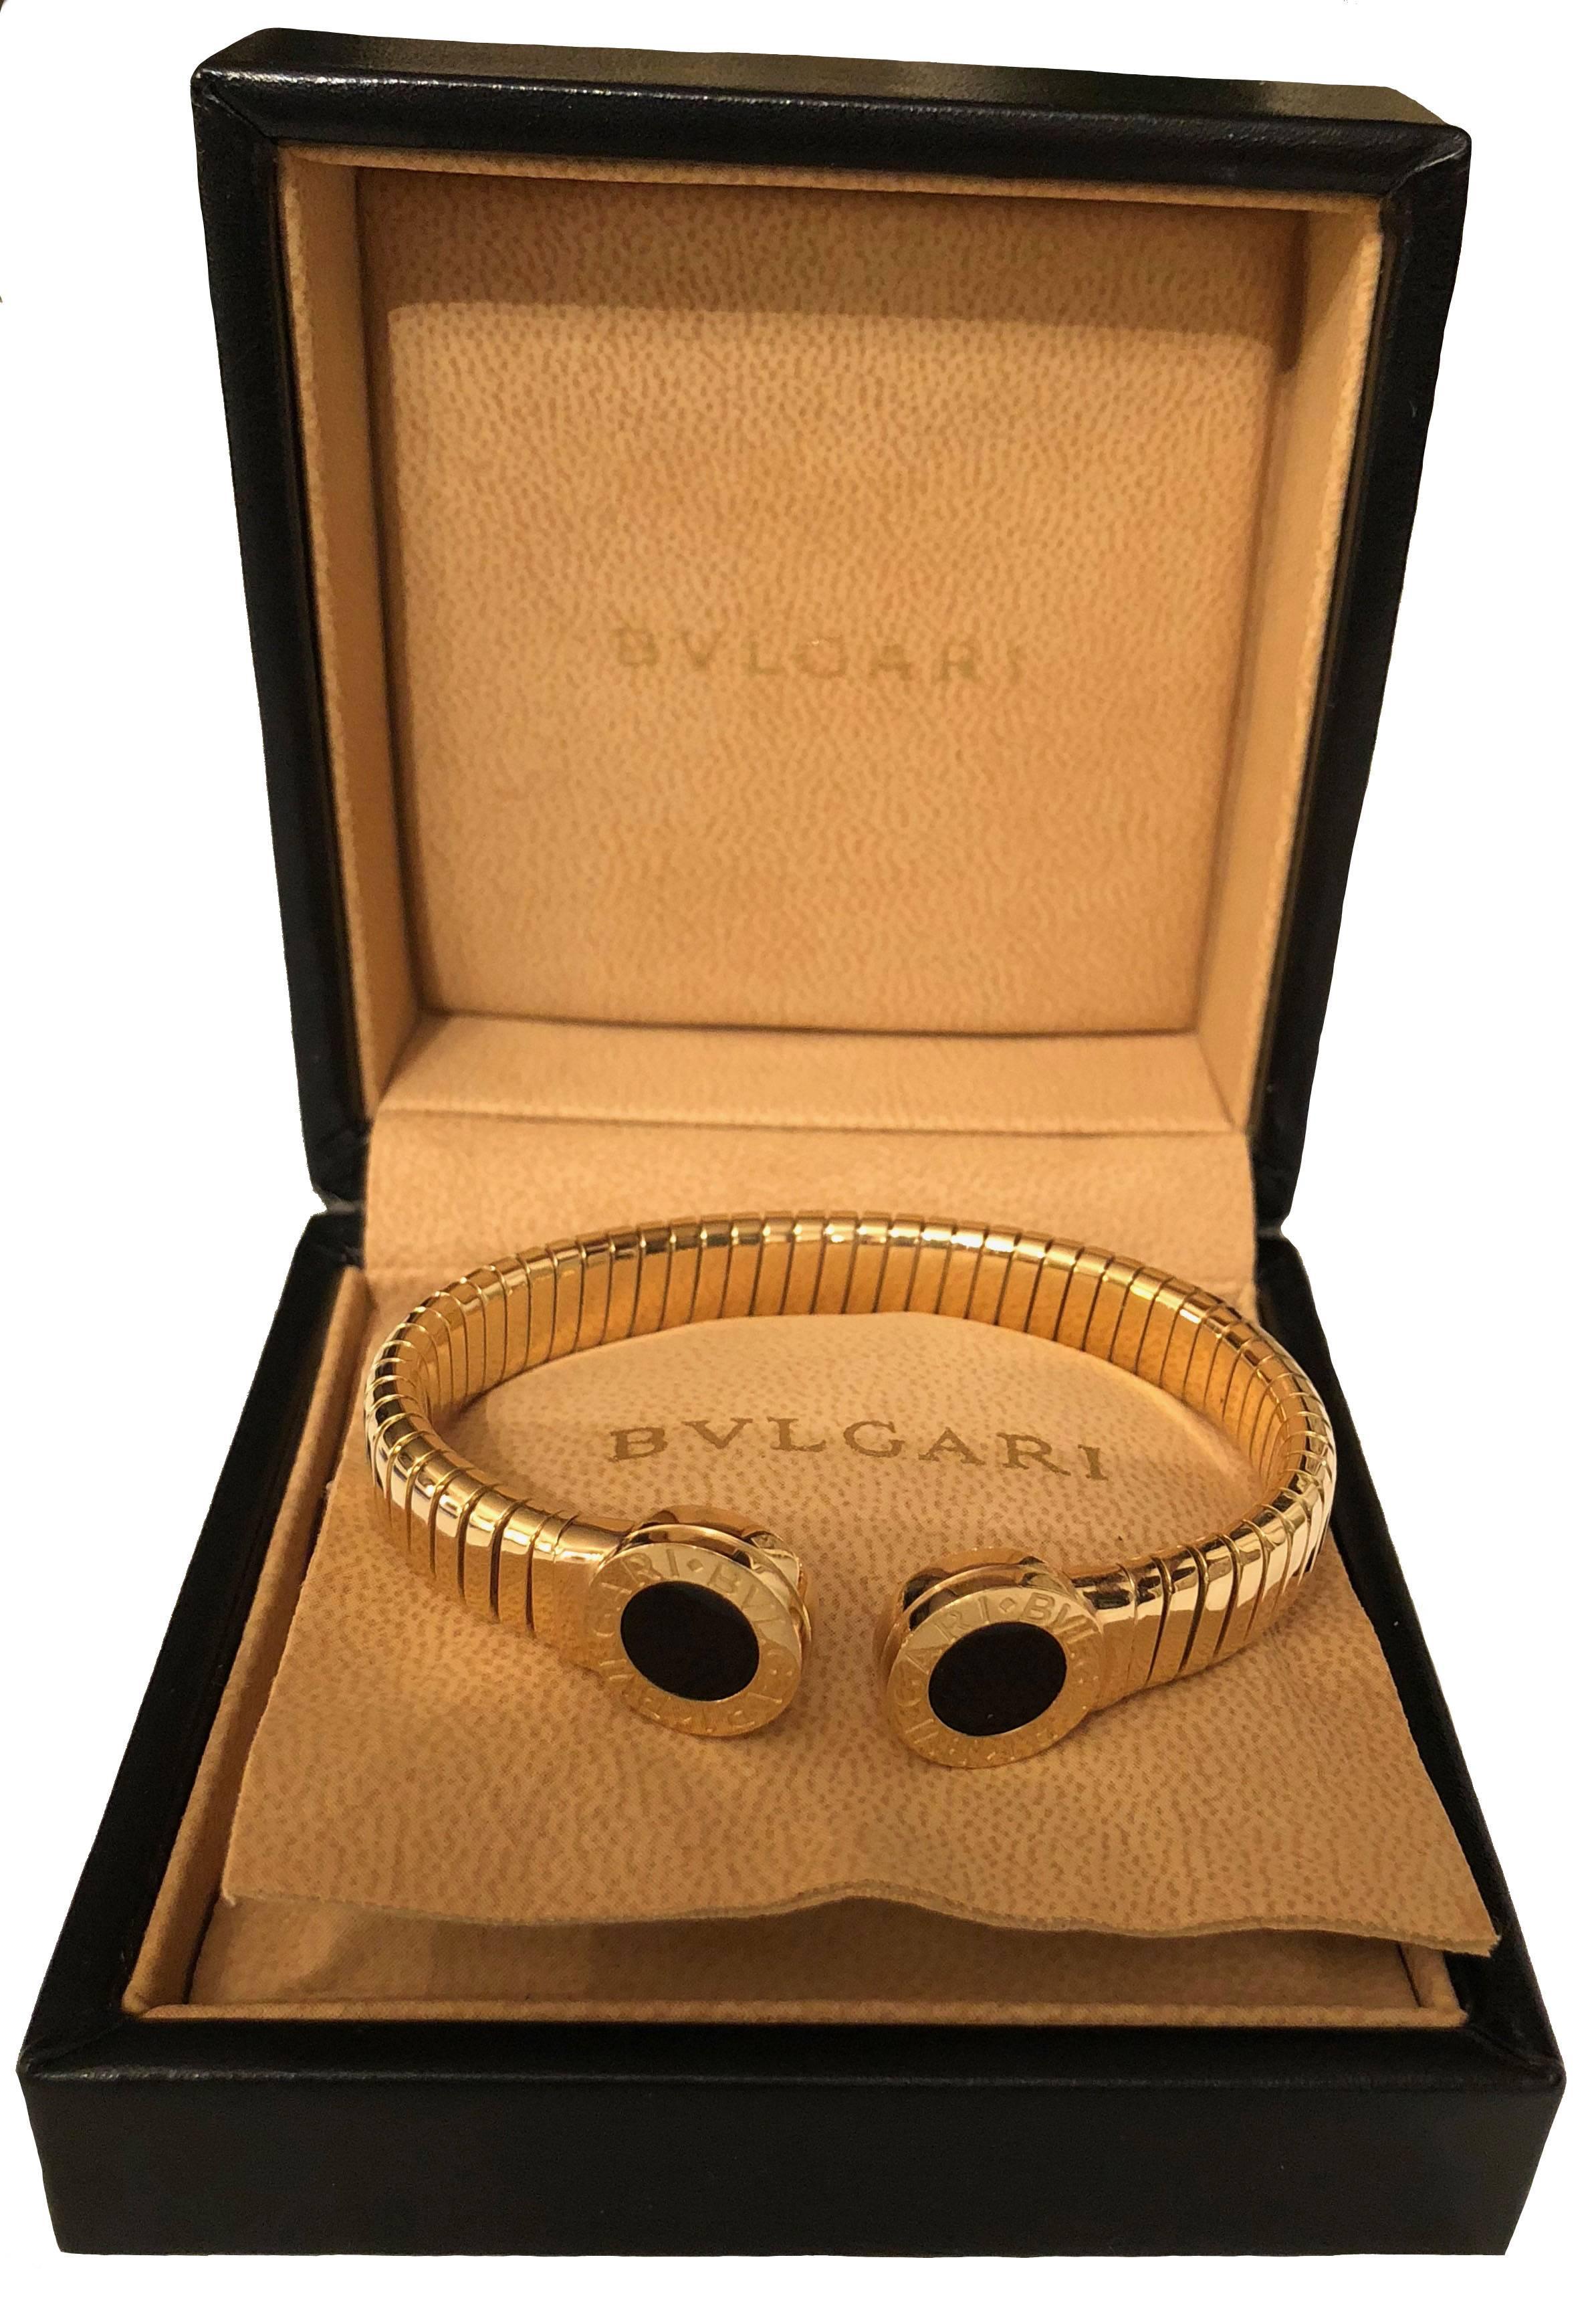 Elegant and sophisticated bracelet from the Bulgari-Bulgari Collection. 
 
Material: 18k Yellow Gold and 2 onyx stones encased with a gold trim engraved with BVLGARI.
Weight: Average 34 gr. 
Condition: Like new
Comes with: Bulgari original box 

All